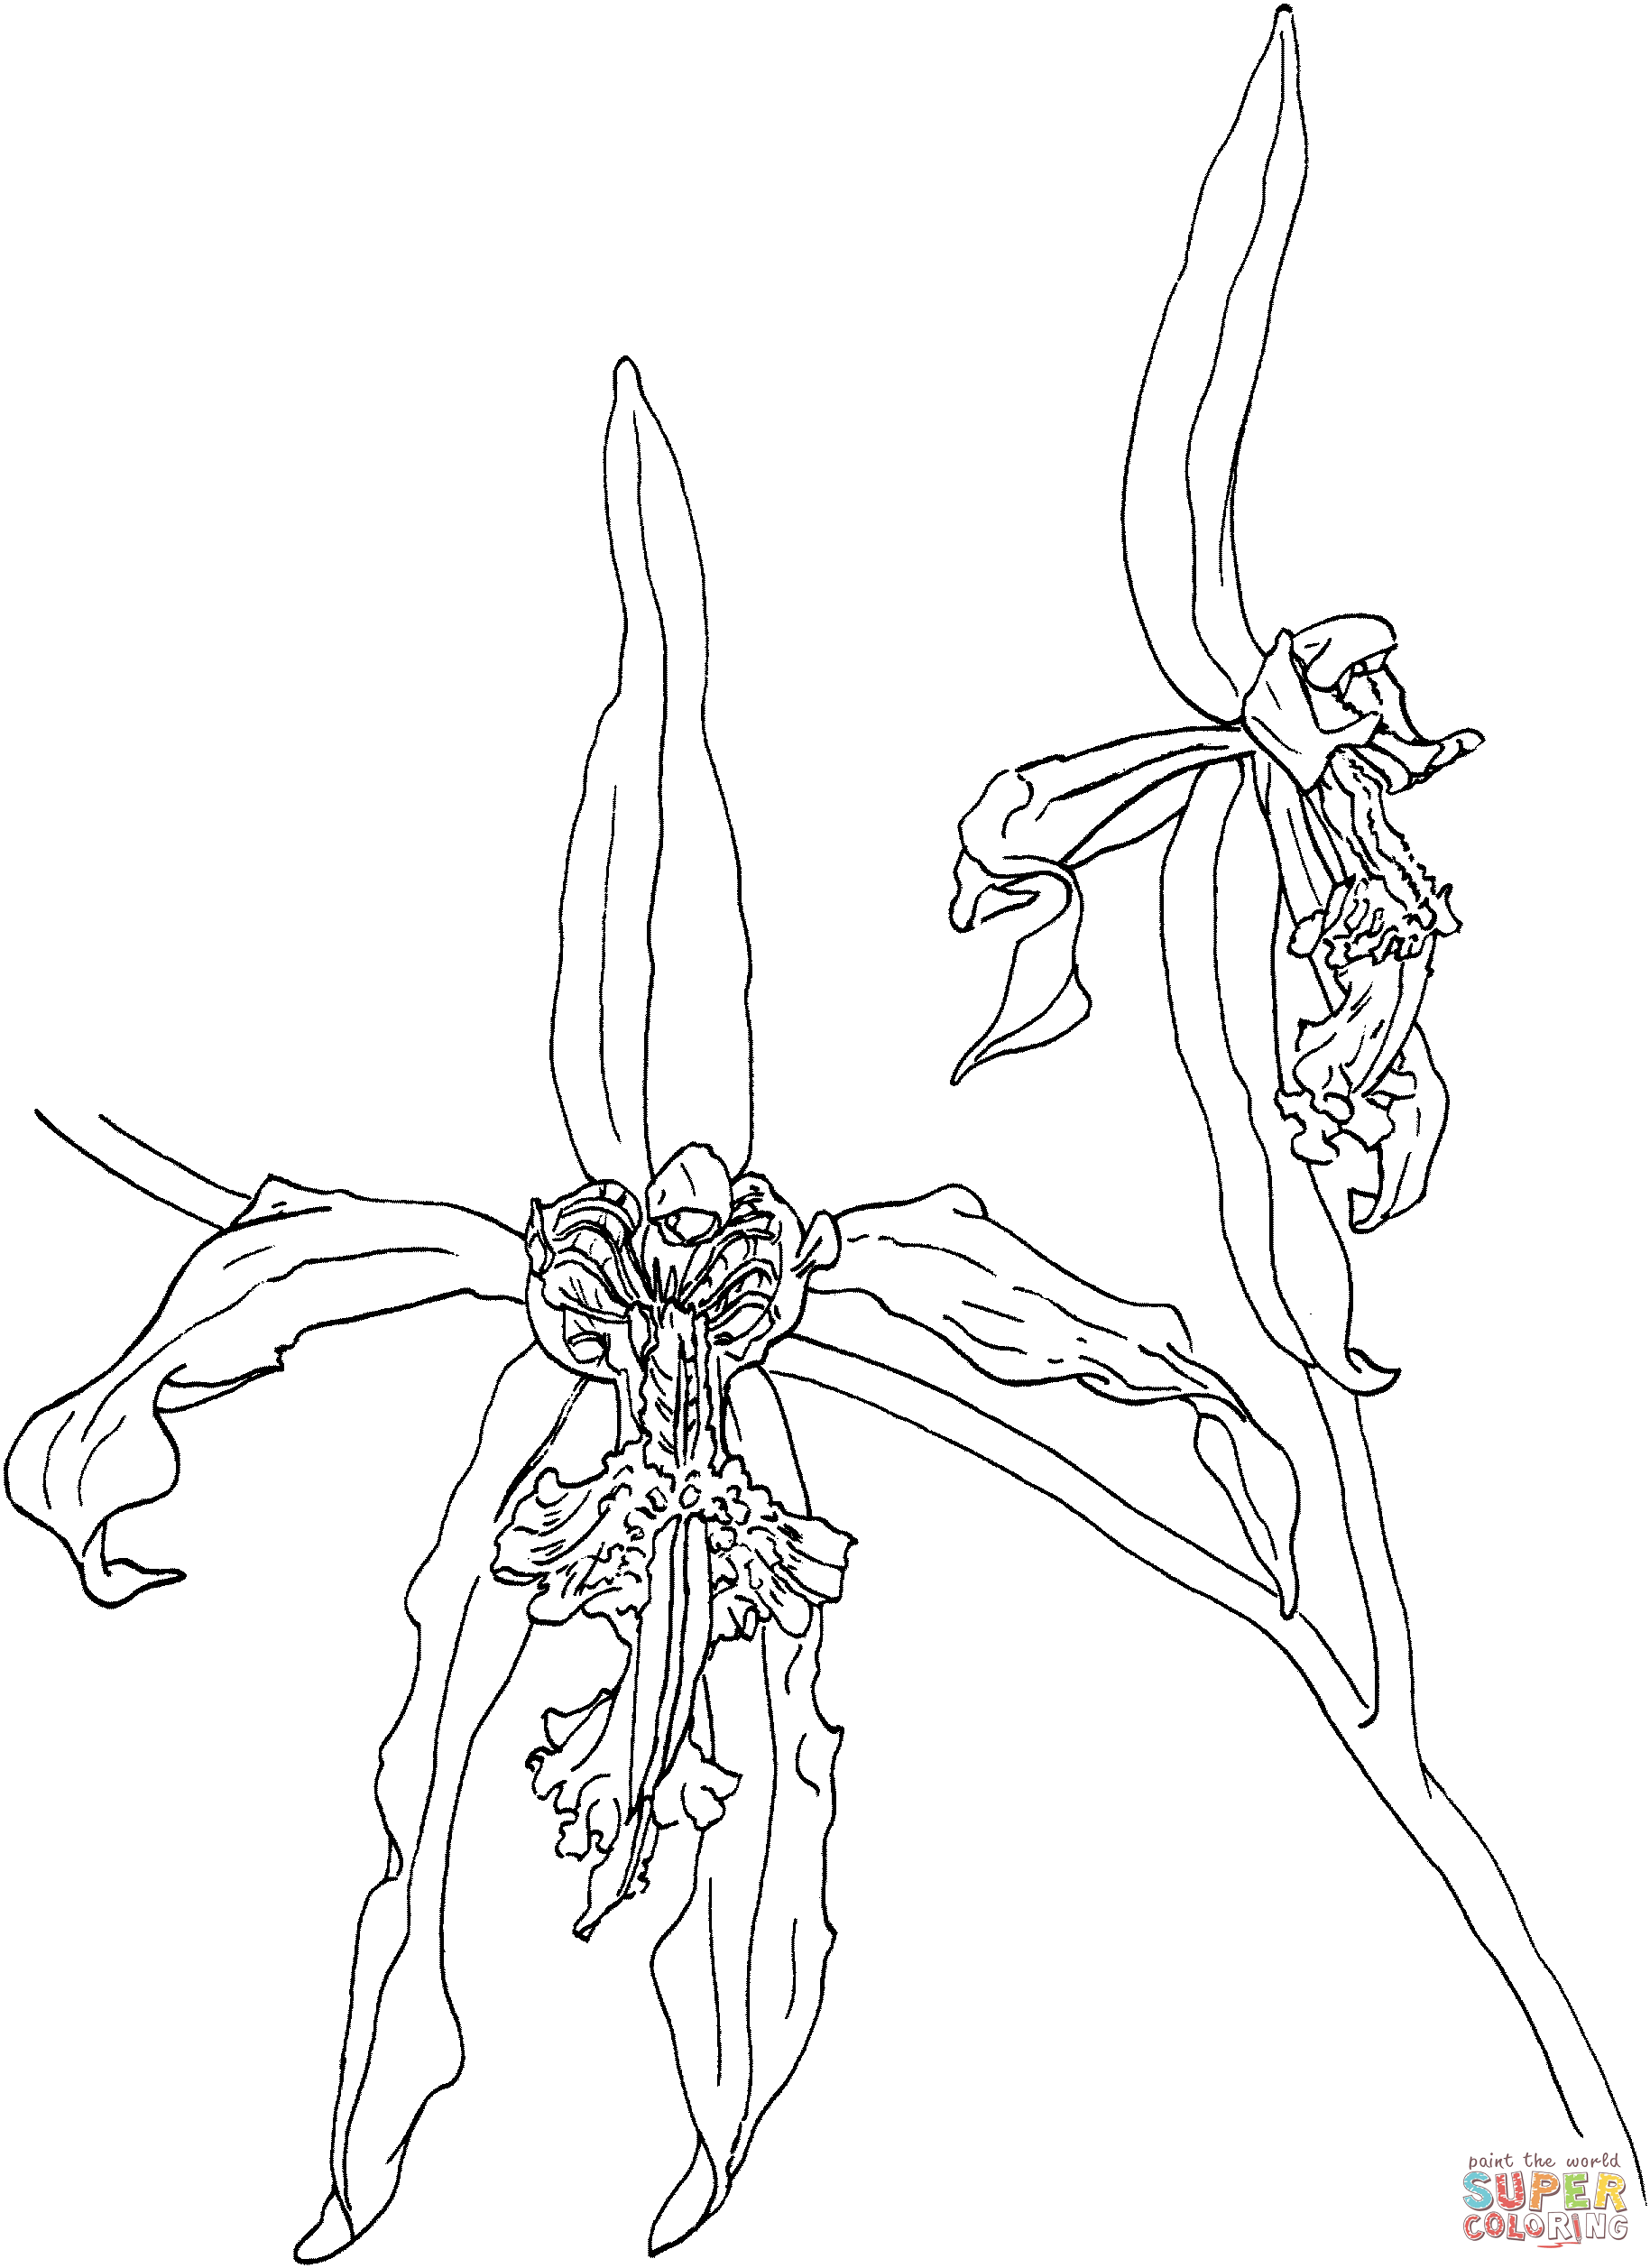 Black Orchid Coloring Pages